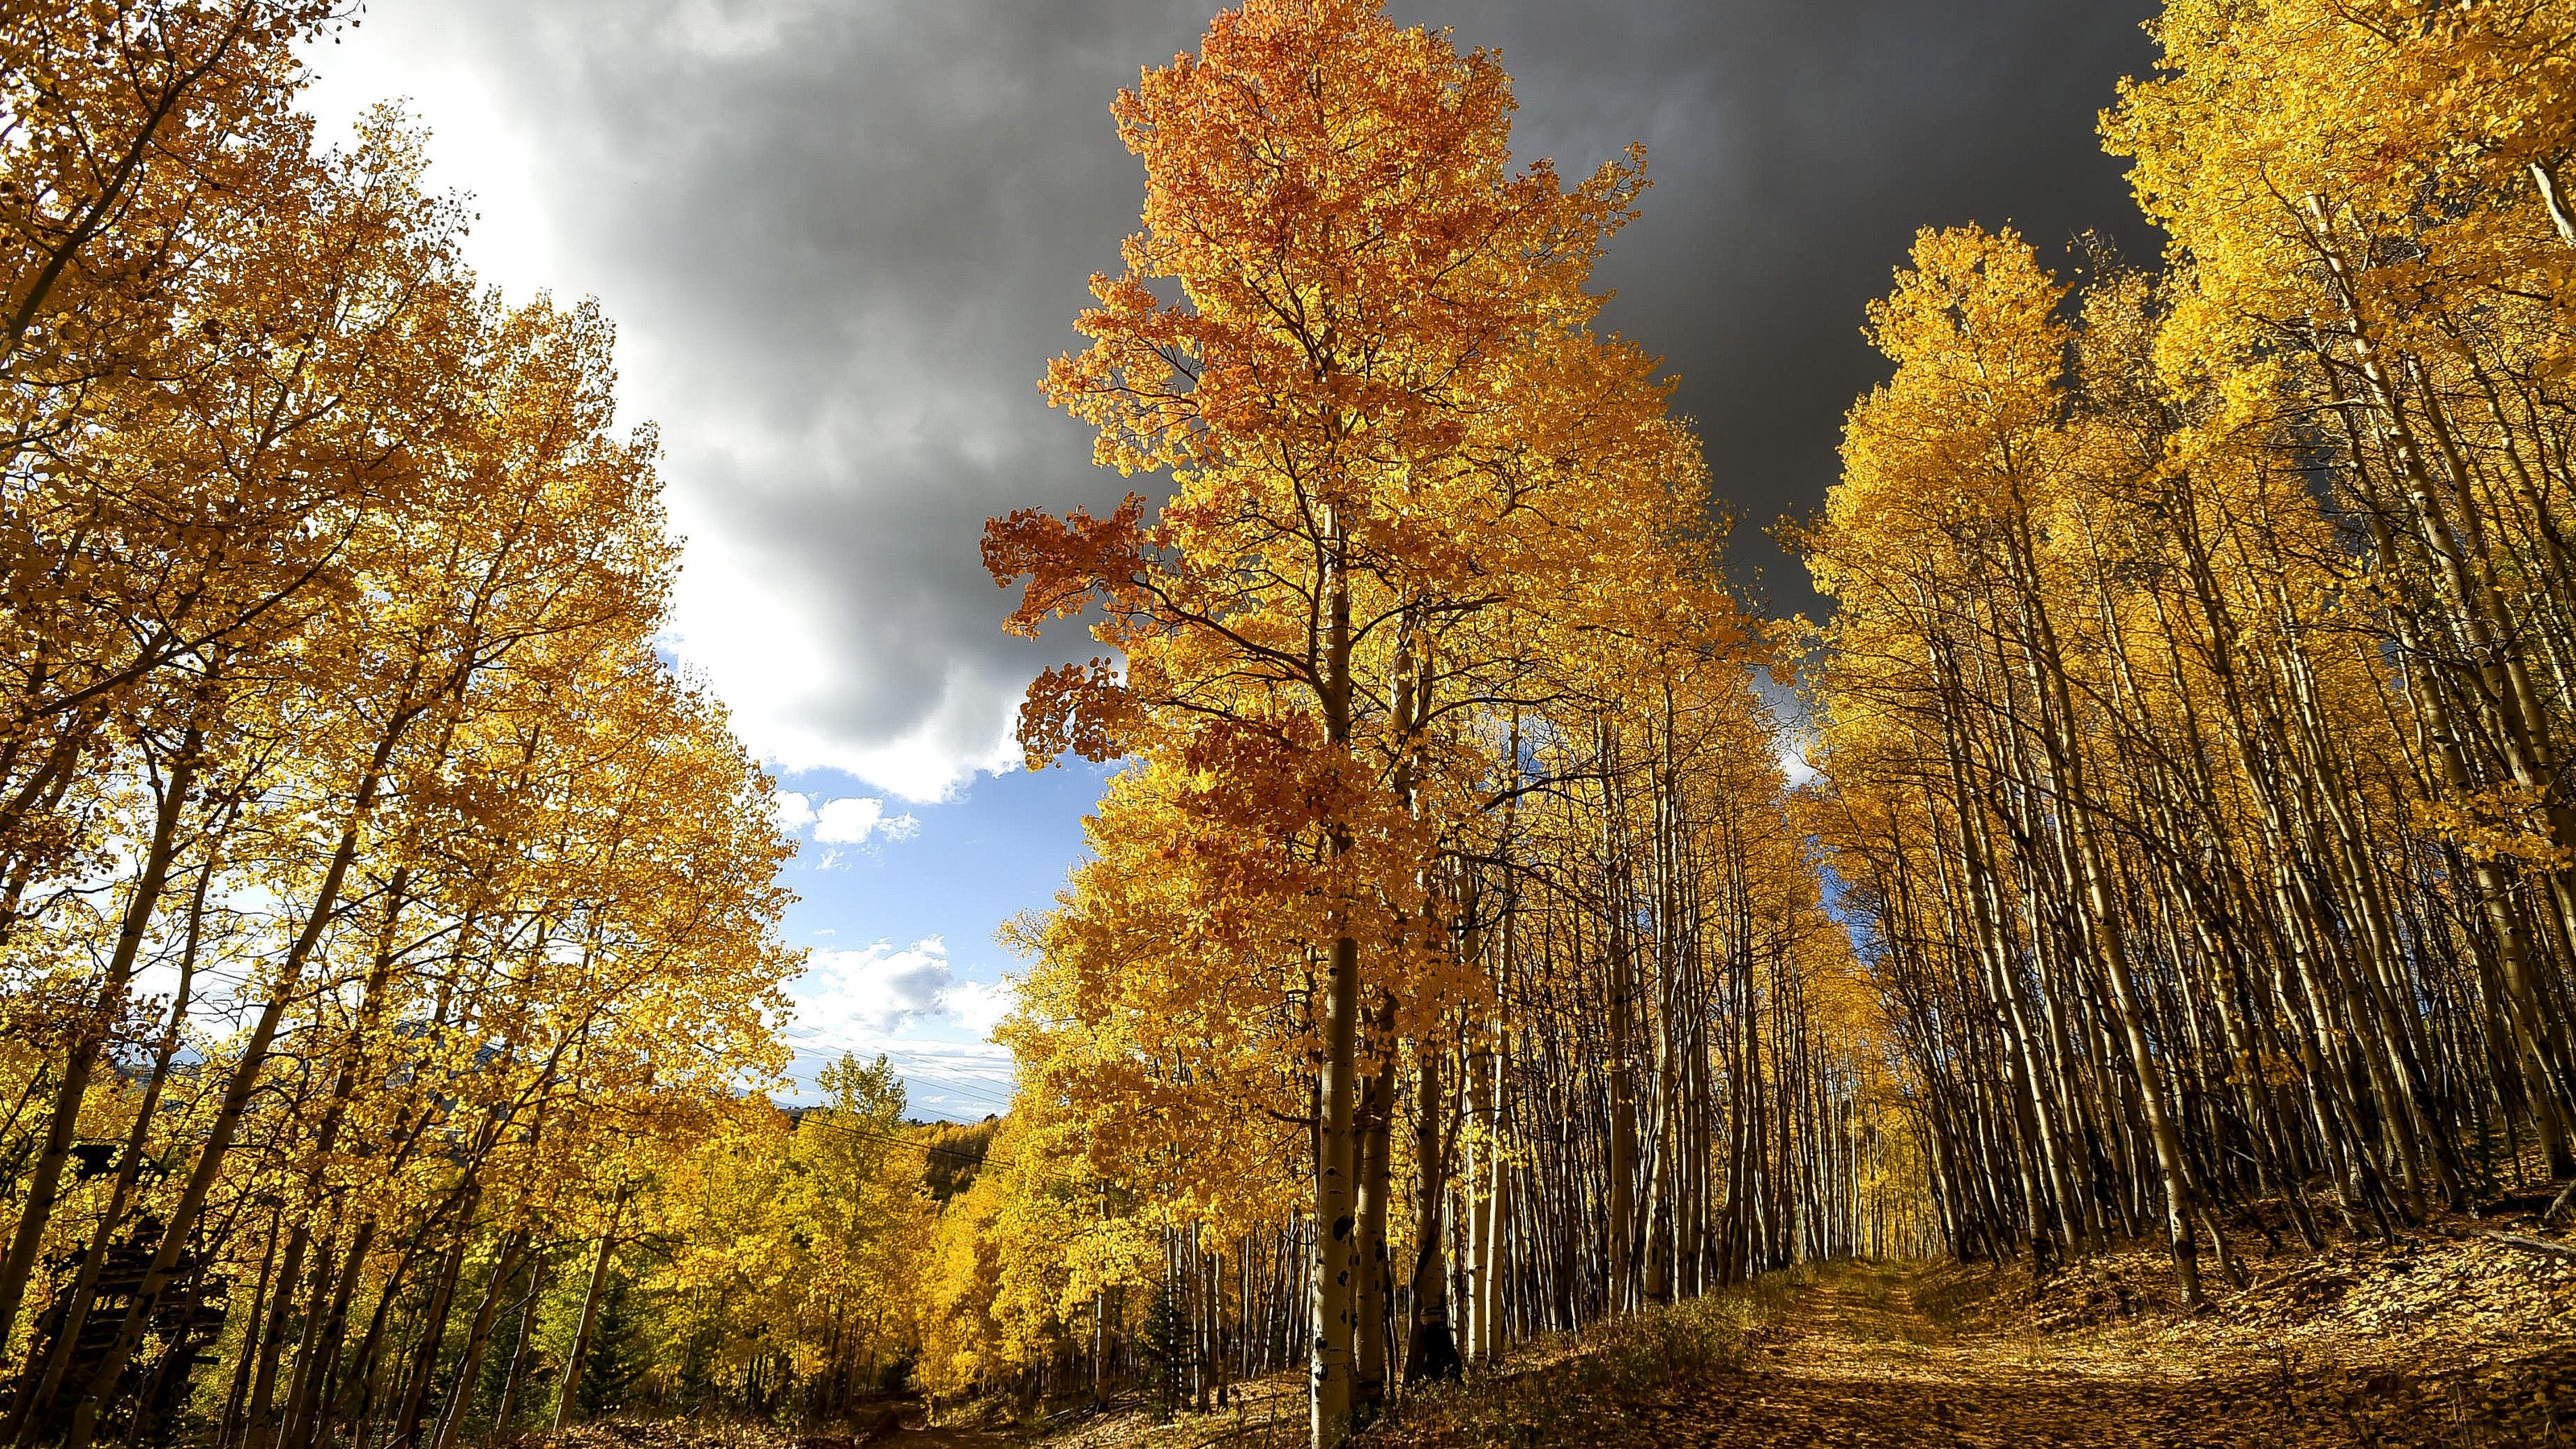 Where to see Colorado’s best fall color displays